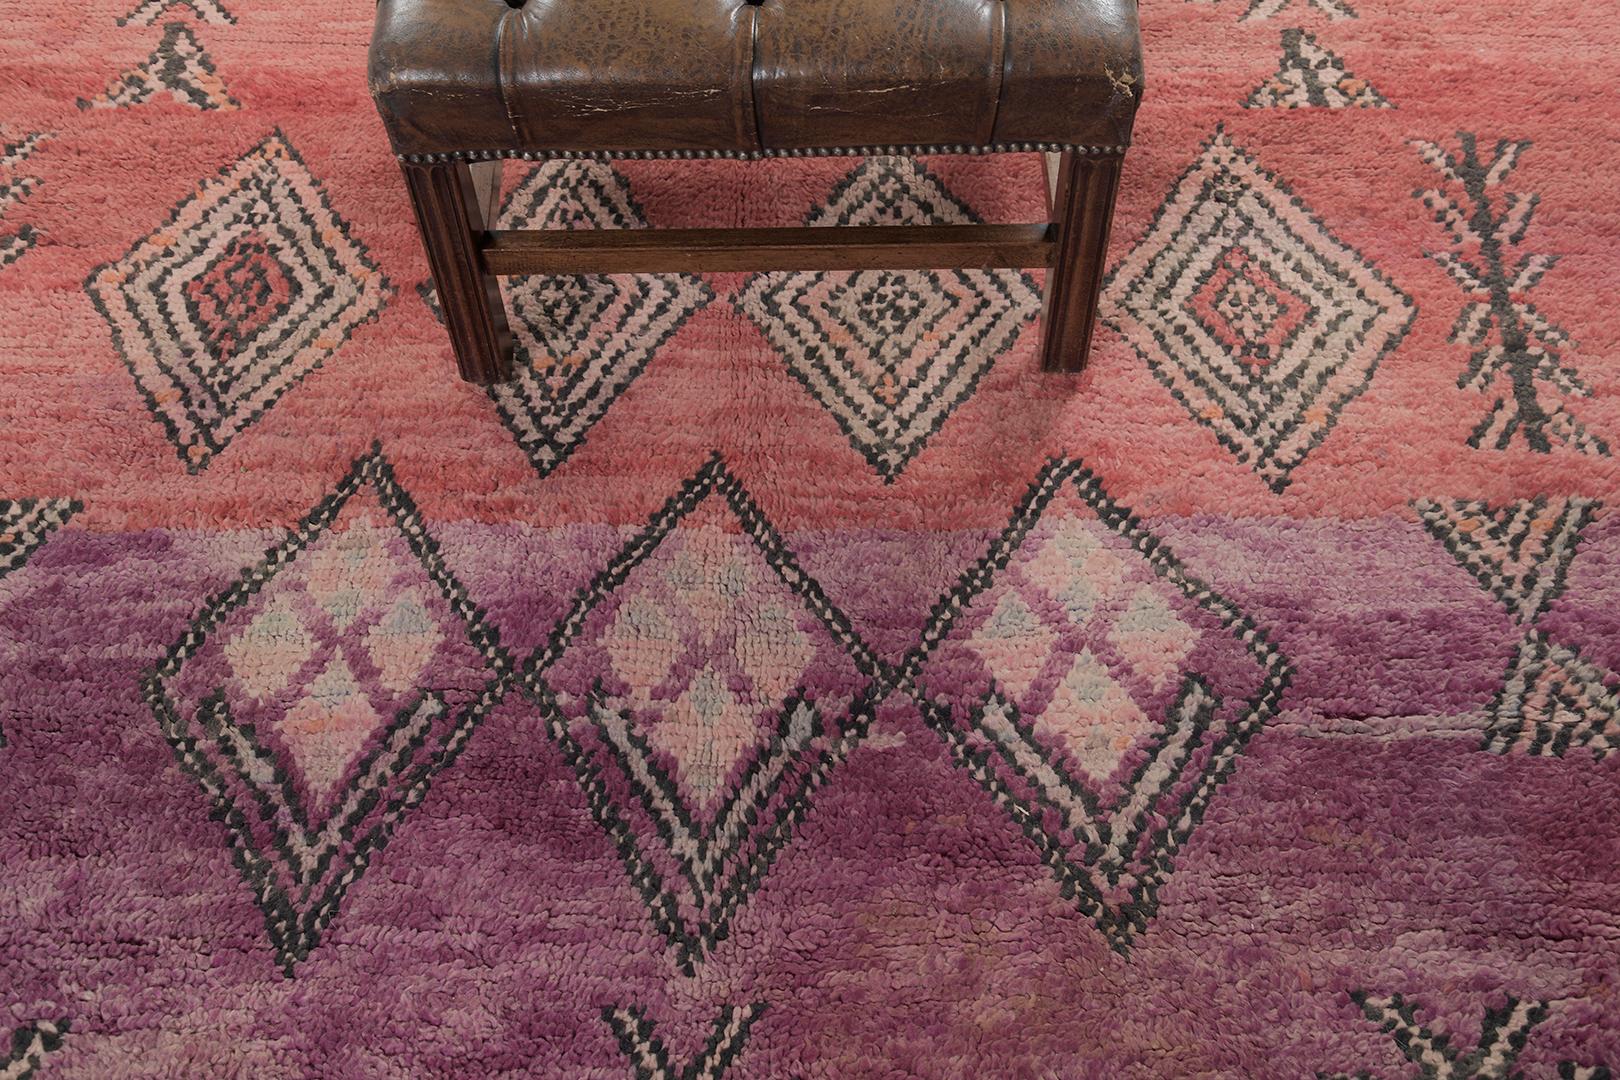 Fancy and lively interiors are the ones that can captivate your heart. It makes your room alive together with our classic and one-of-a-kind Beni M'Guild Moroccan Rug. Pigmented purple, peach, and coral are perfectly complemented with all the stories